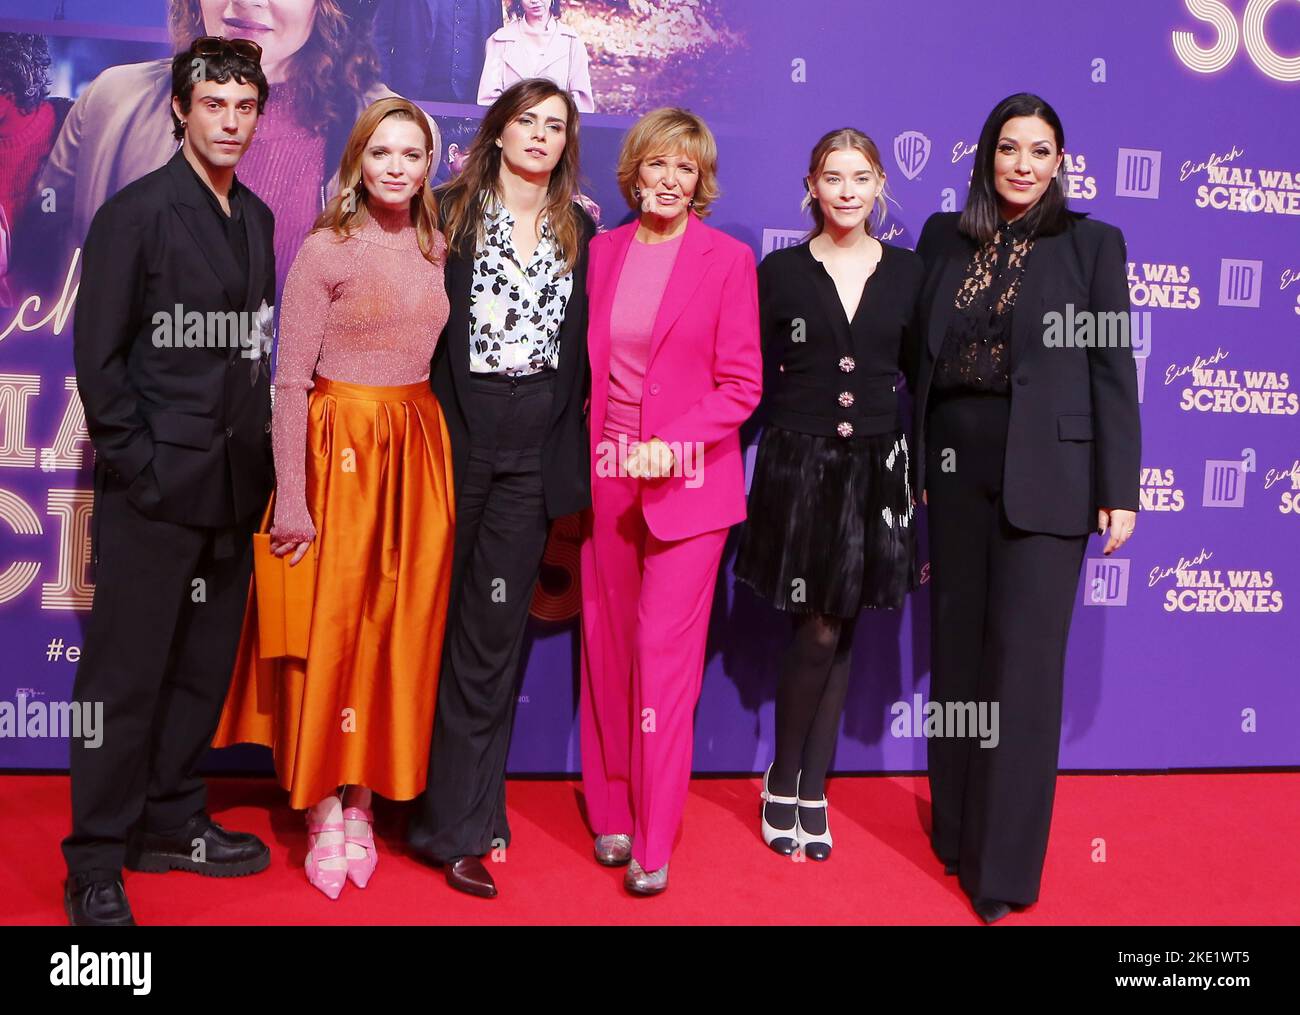 Berlin, Germany, 08/11/2022, World premiere of the film EINFACH MAL WAS  SCHÖNES in the zoo palace in the presence of the director, screenwriter  and leading actress Karoline Herfurth The photo shows the